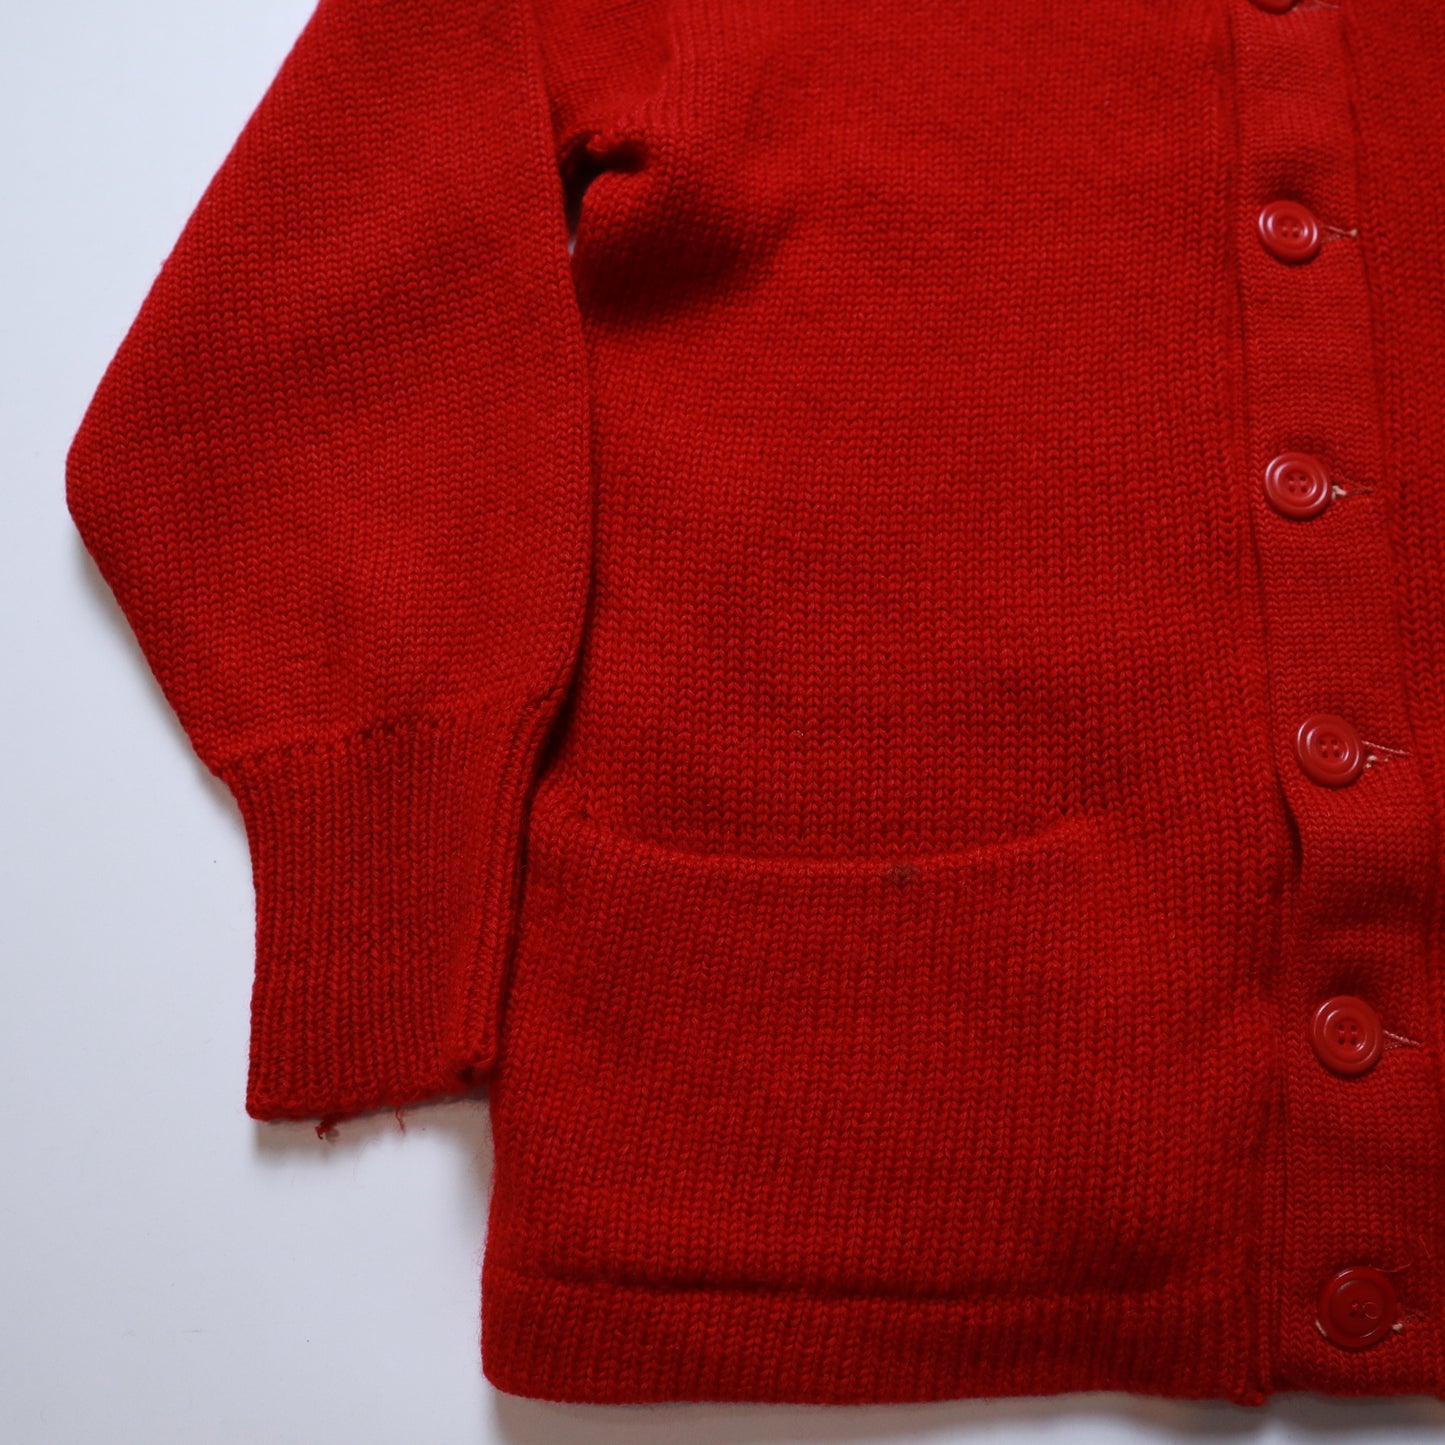 60's Letterman Sweater red knitted jacket cardigan